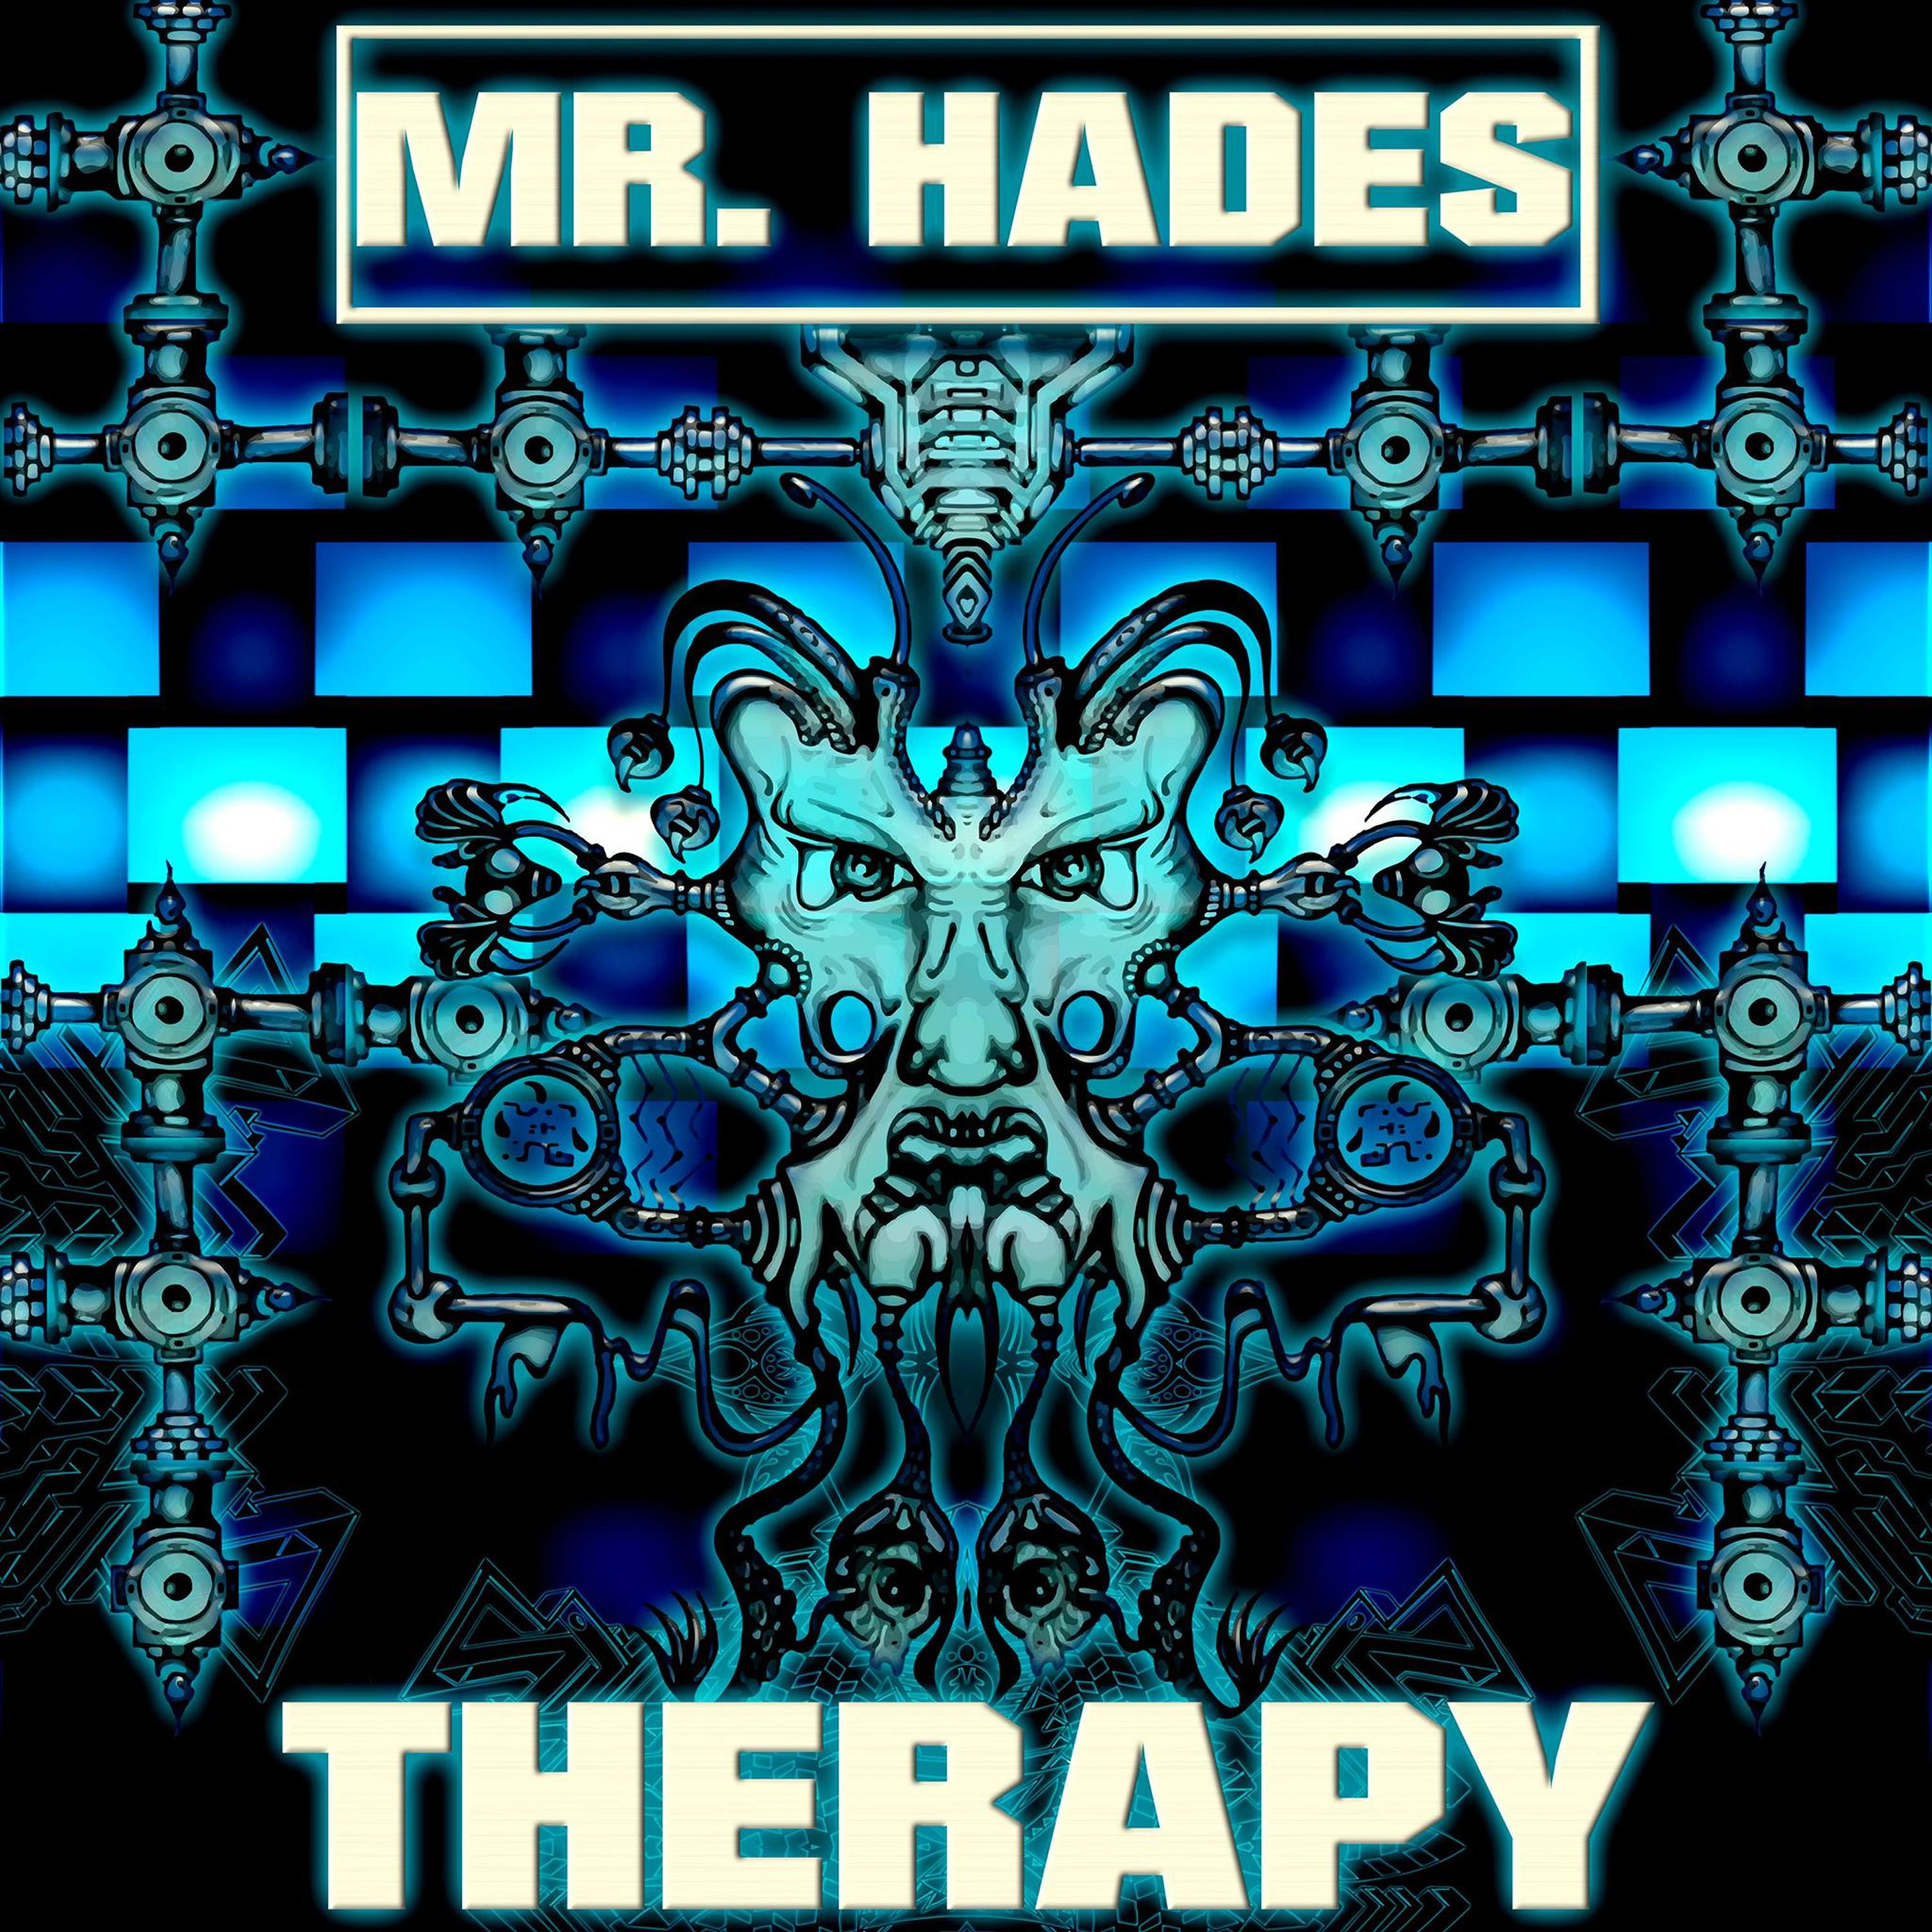 Mr. Hades - The Speed of Pain